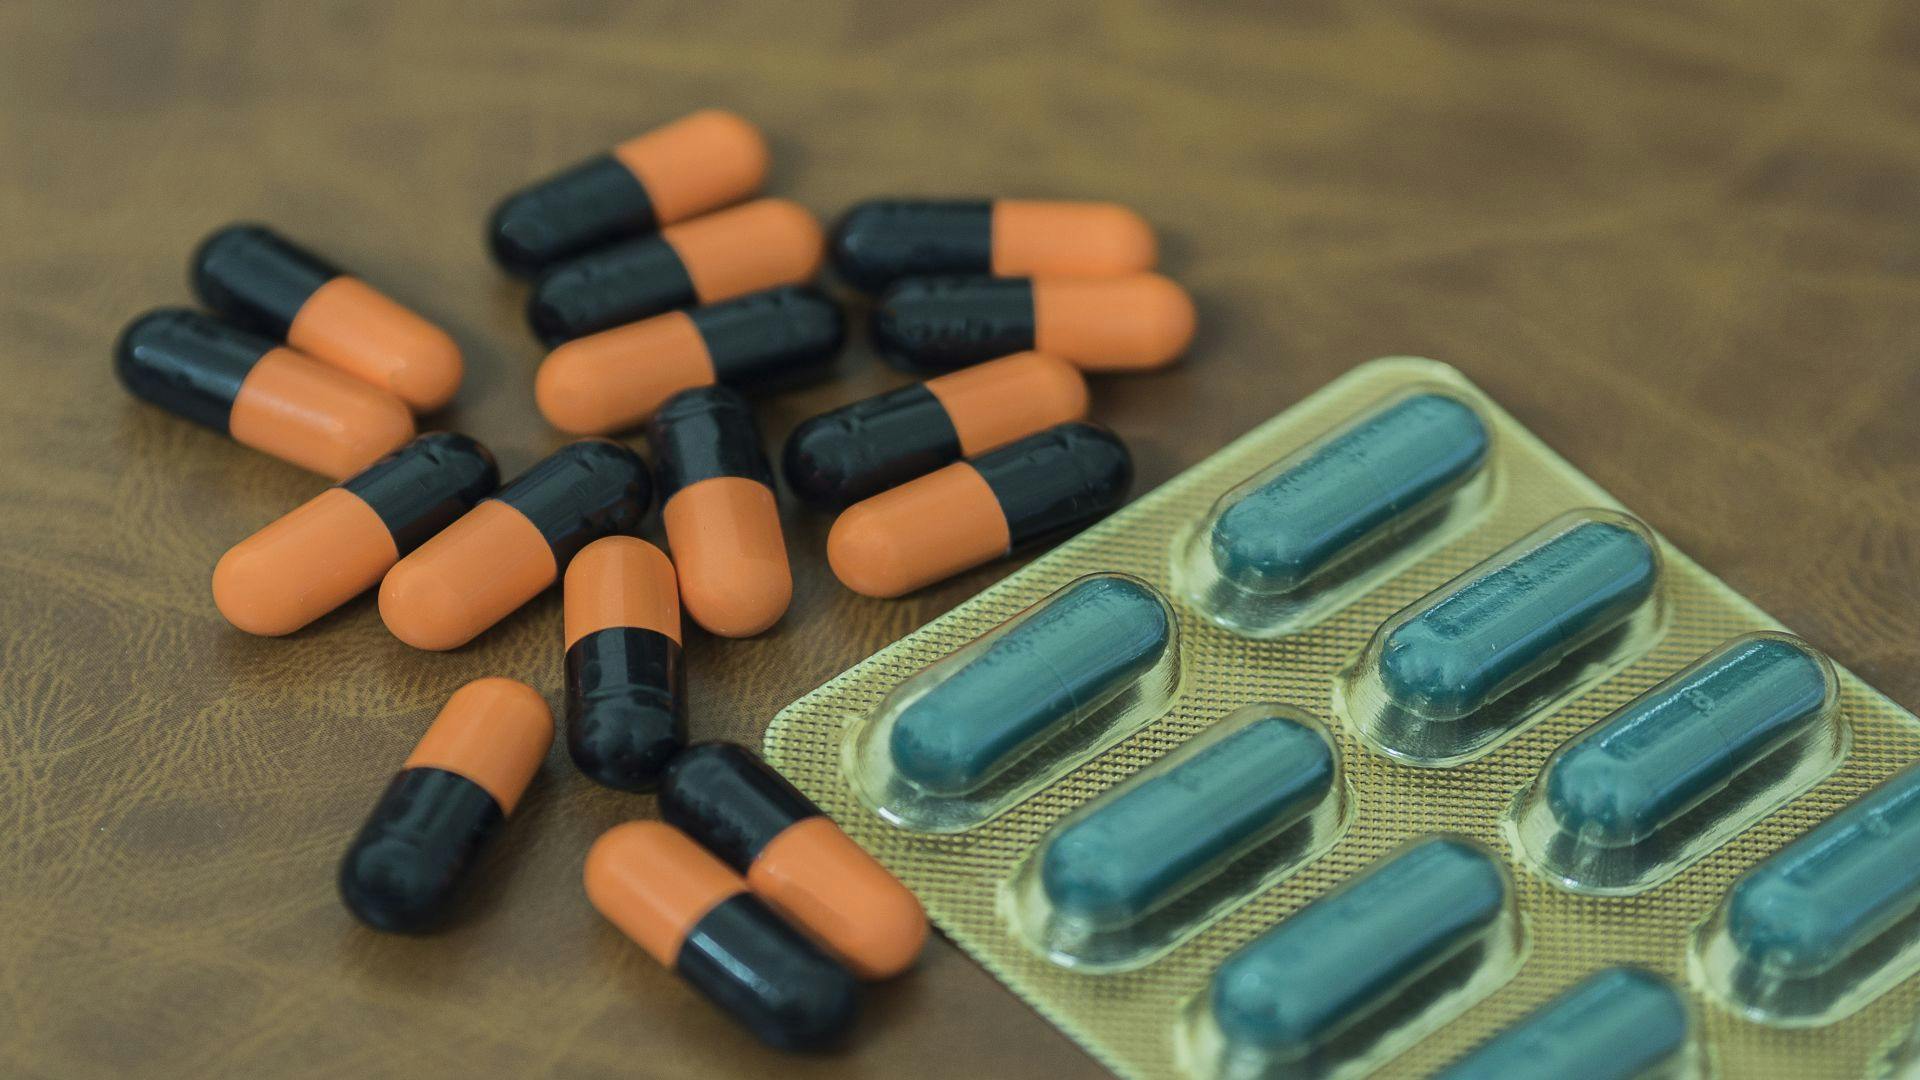 Certain Antibiotics During Pregnancy May Increase Risk of Birth Defects